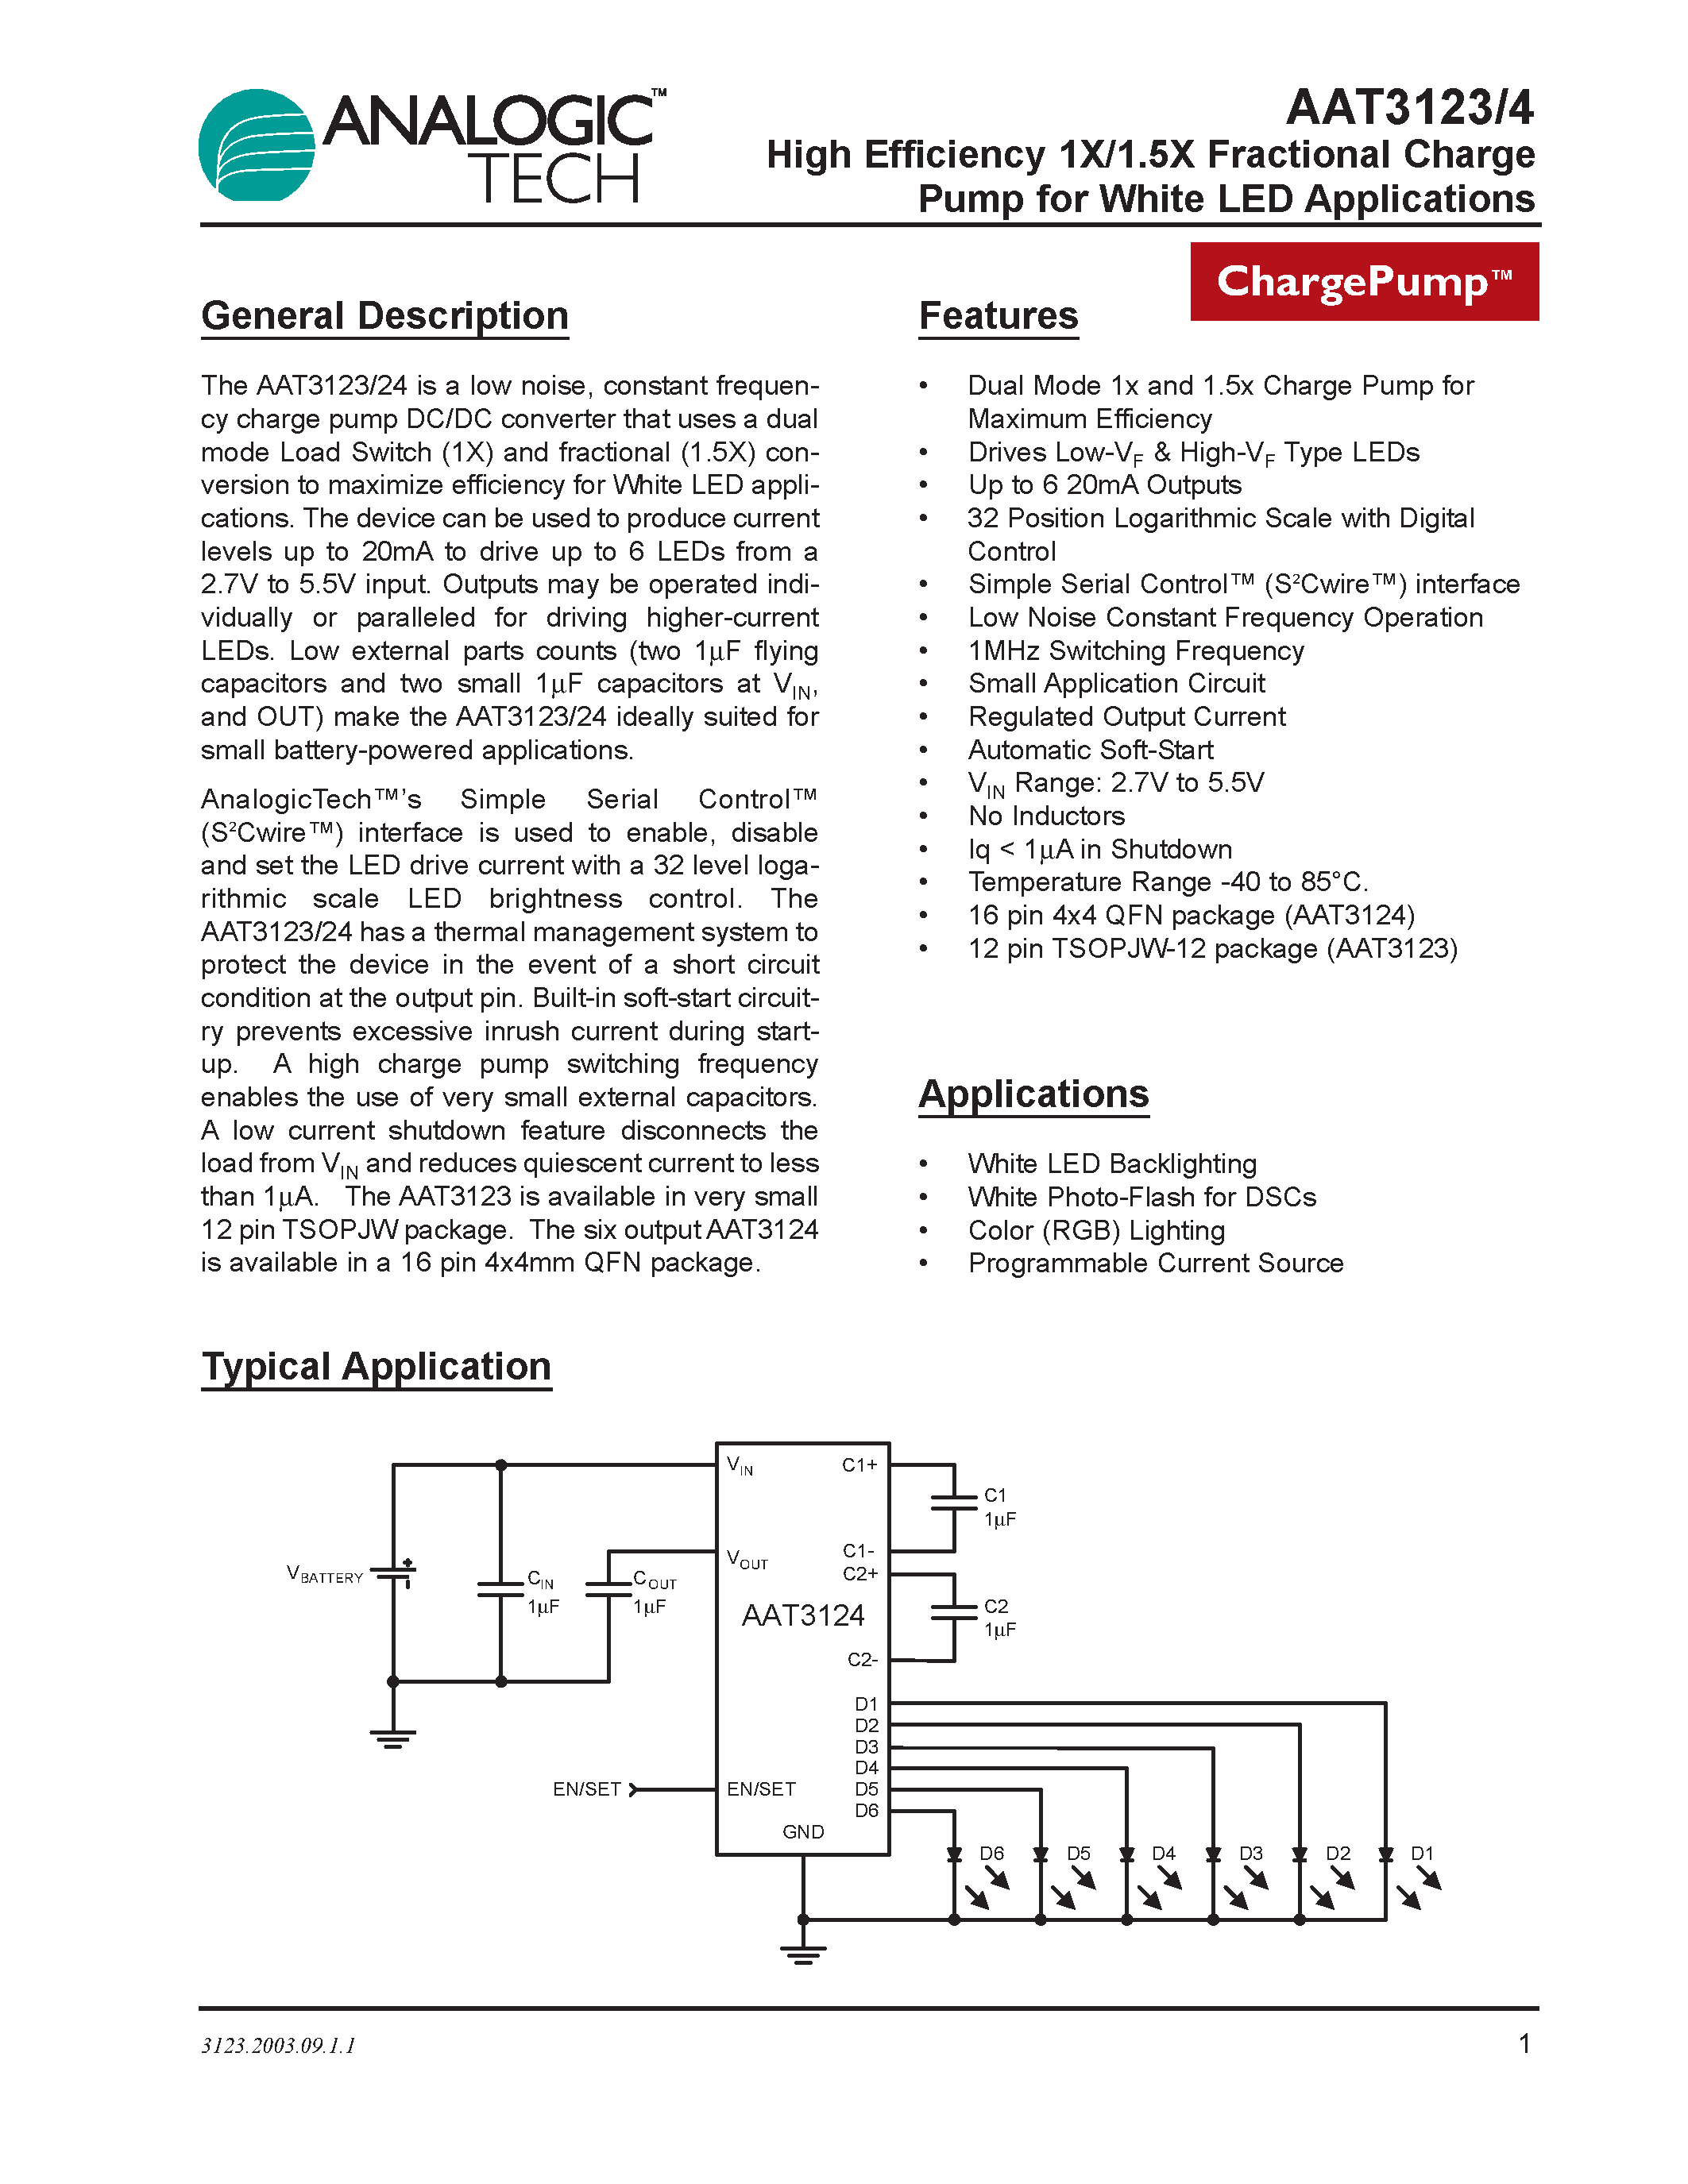 Datasheet AAT3123 - High Efficiency 1X/1.5X Fractional Charge Pump for White LED Applications page 1